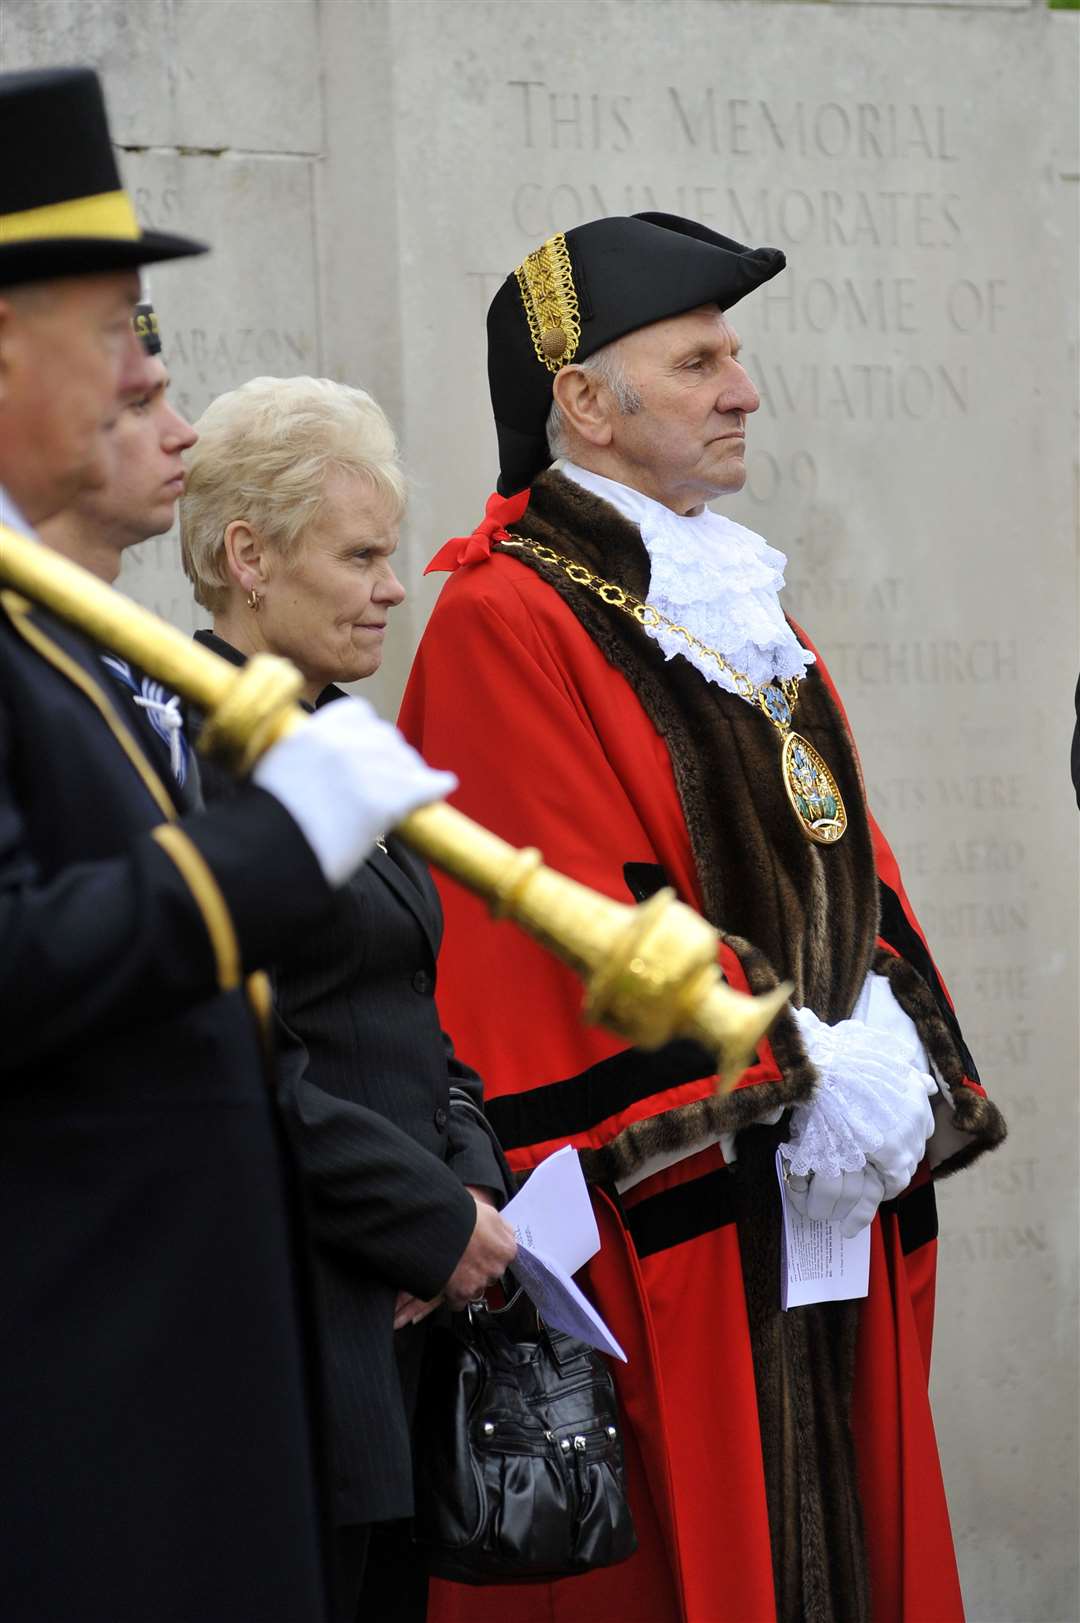 Mayor of Swale Cllr Ben Stokes with Mayoress Cllr Sylvia Bennett at the 2012 Eastchurch Pioneer Memorial Observation Service